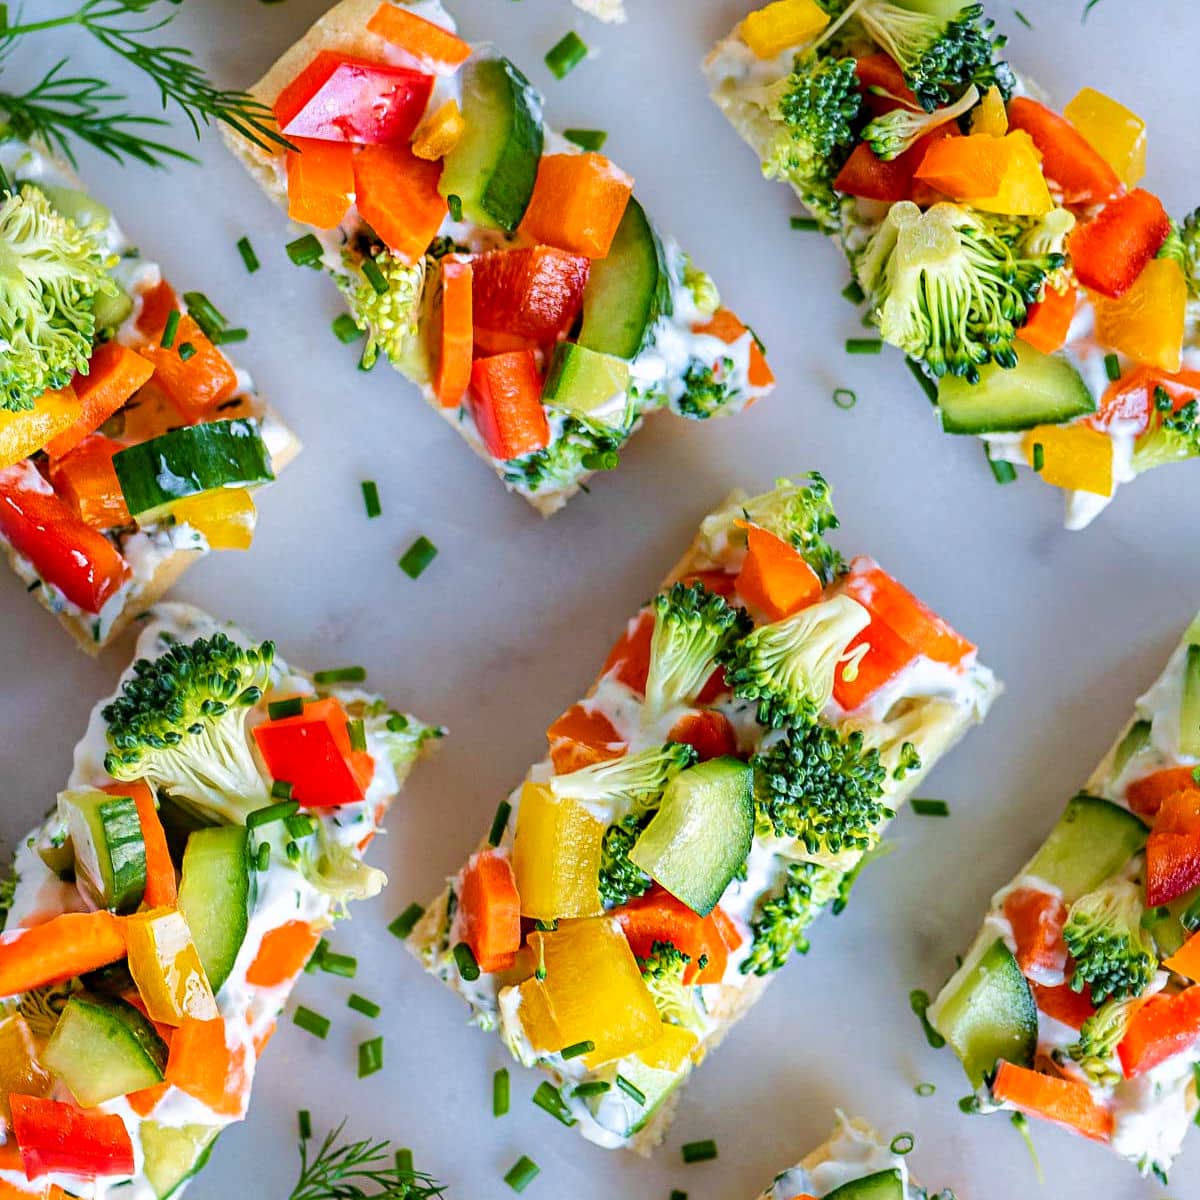 25 Heavy Hors d'oeuvres for a Party - This Healthy Table